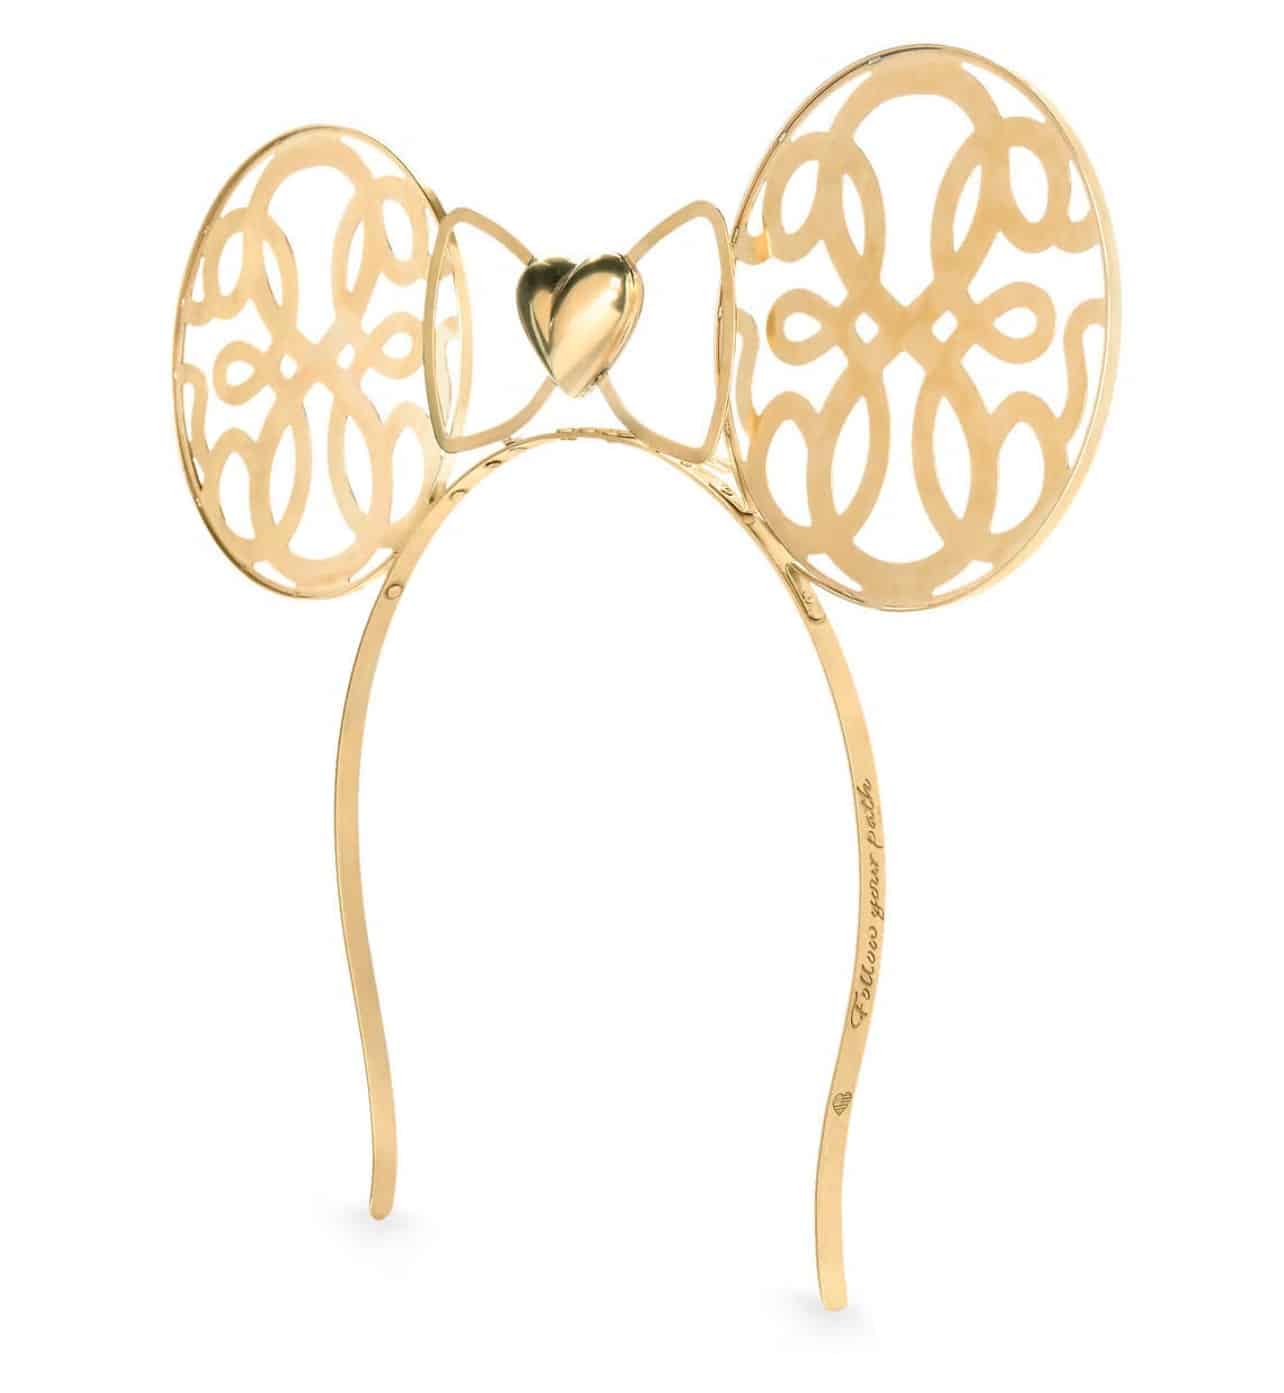 A new Alex and Ani Minnie Mouse metal ear headband has arrived on shopDisney, as part of the DIsney Parks designer collection